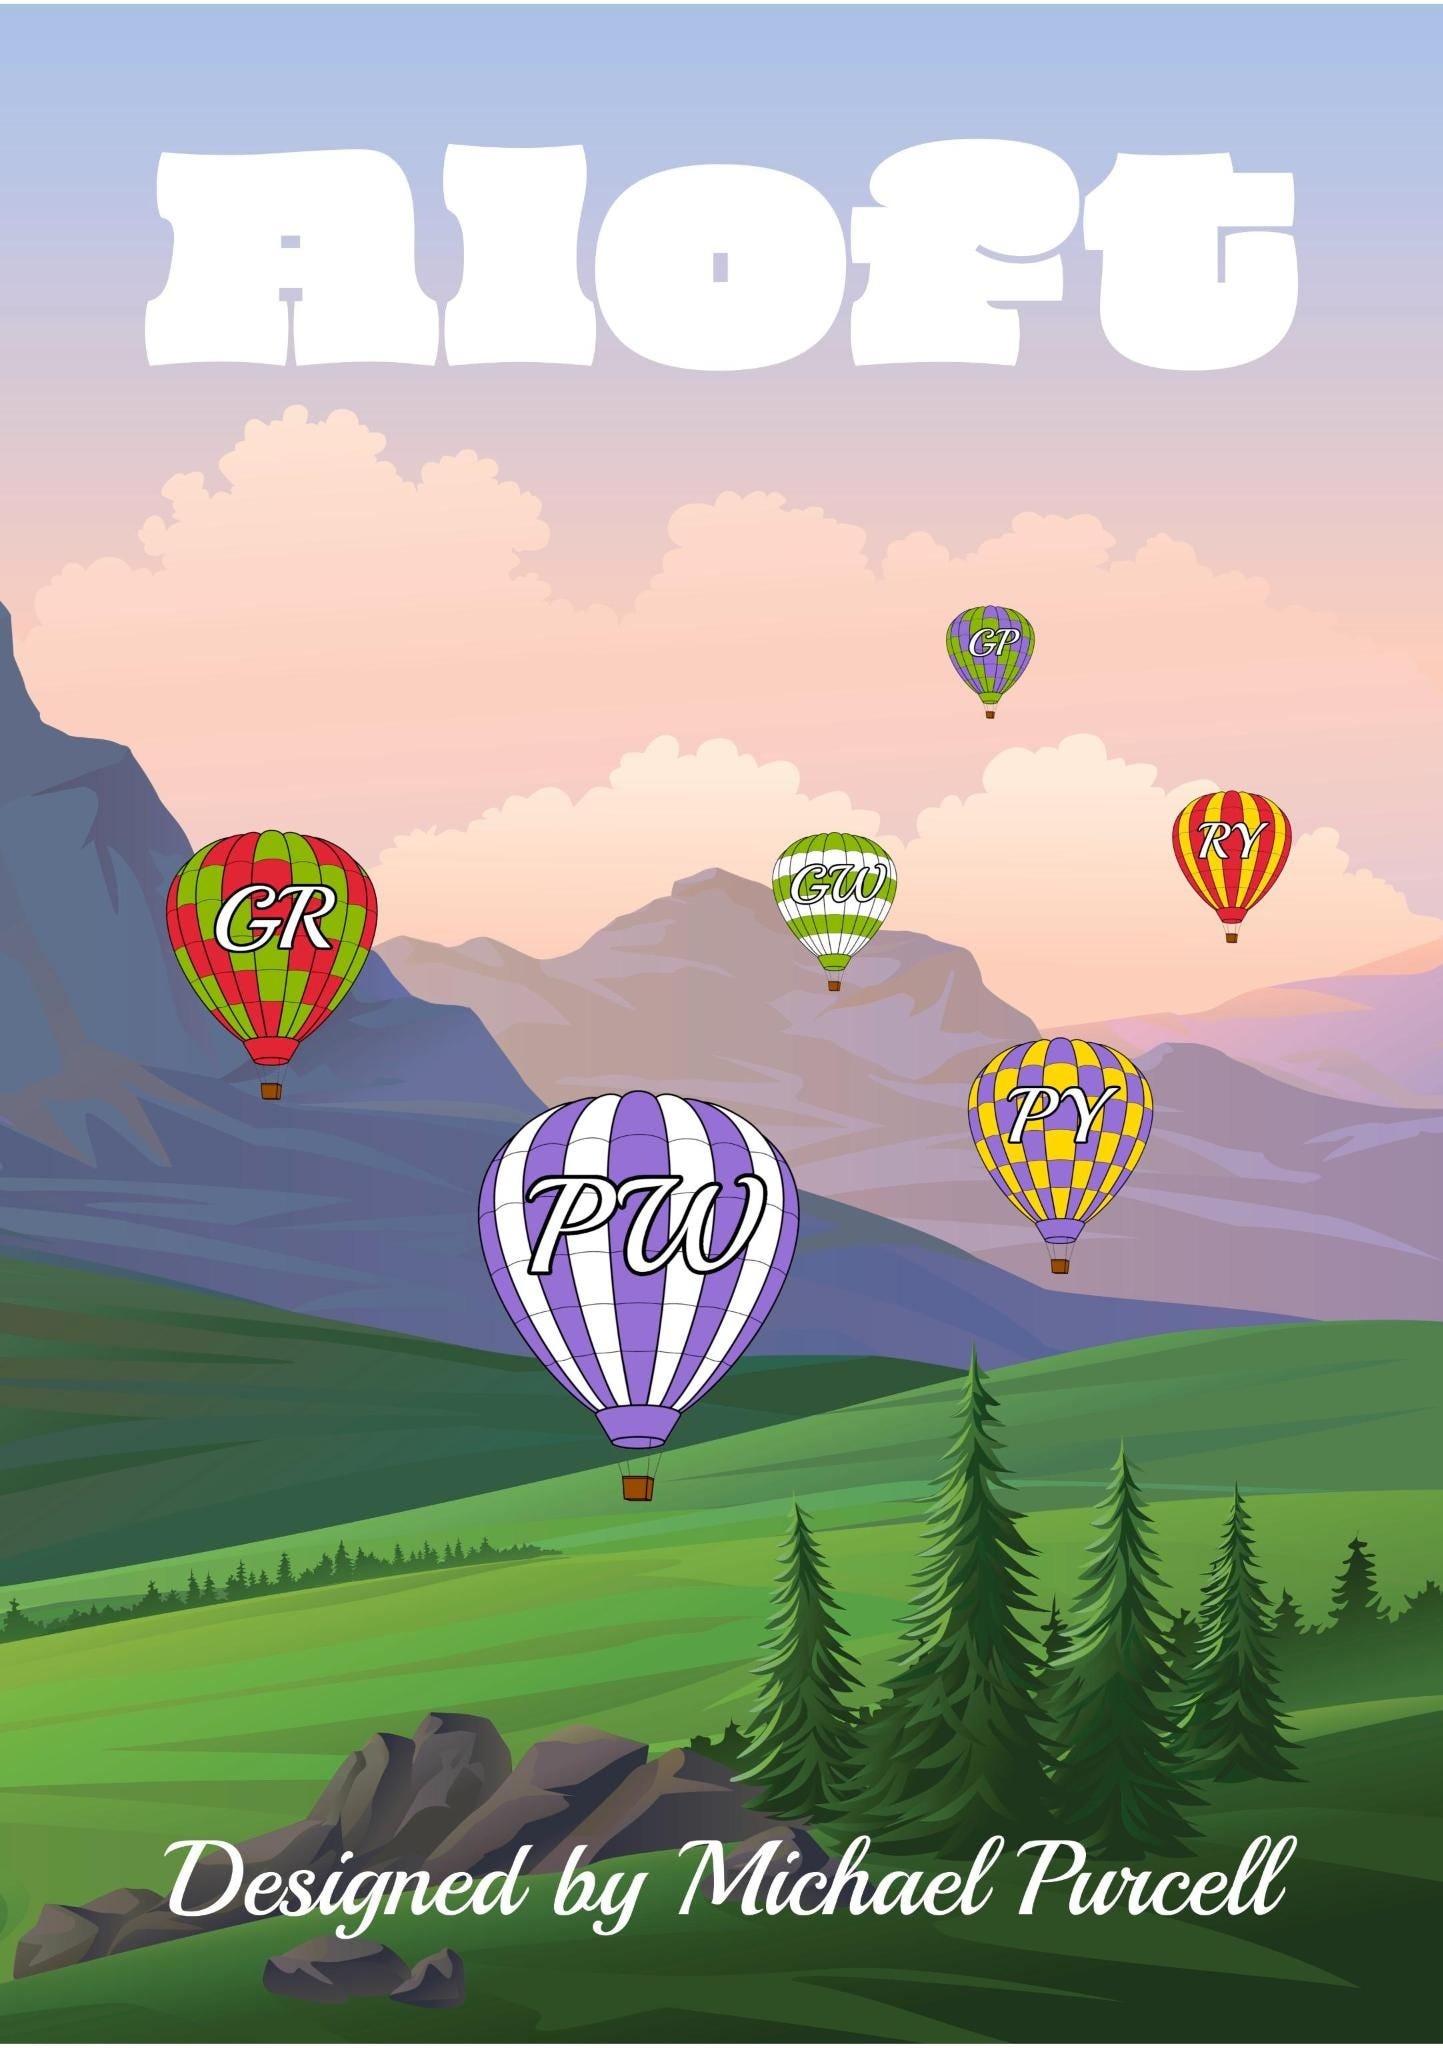 Promo image for the game Aloft, of balloons floating over a mountain landscape. Copyright Michael Purcell, 2023.